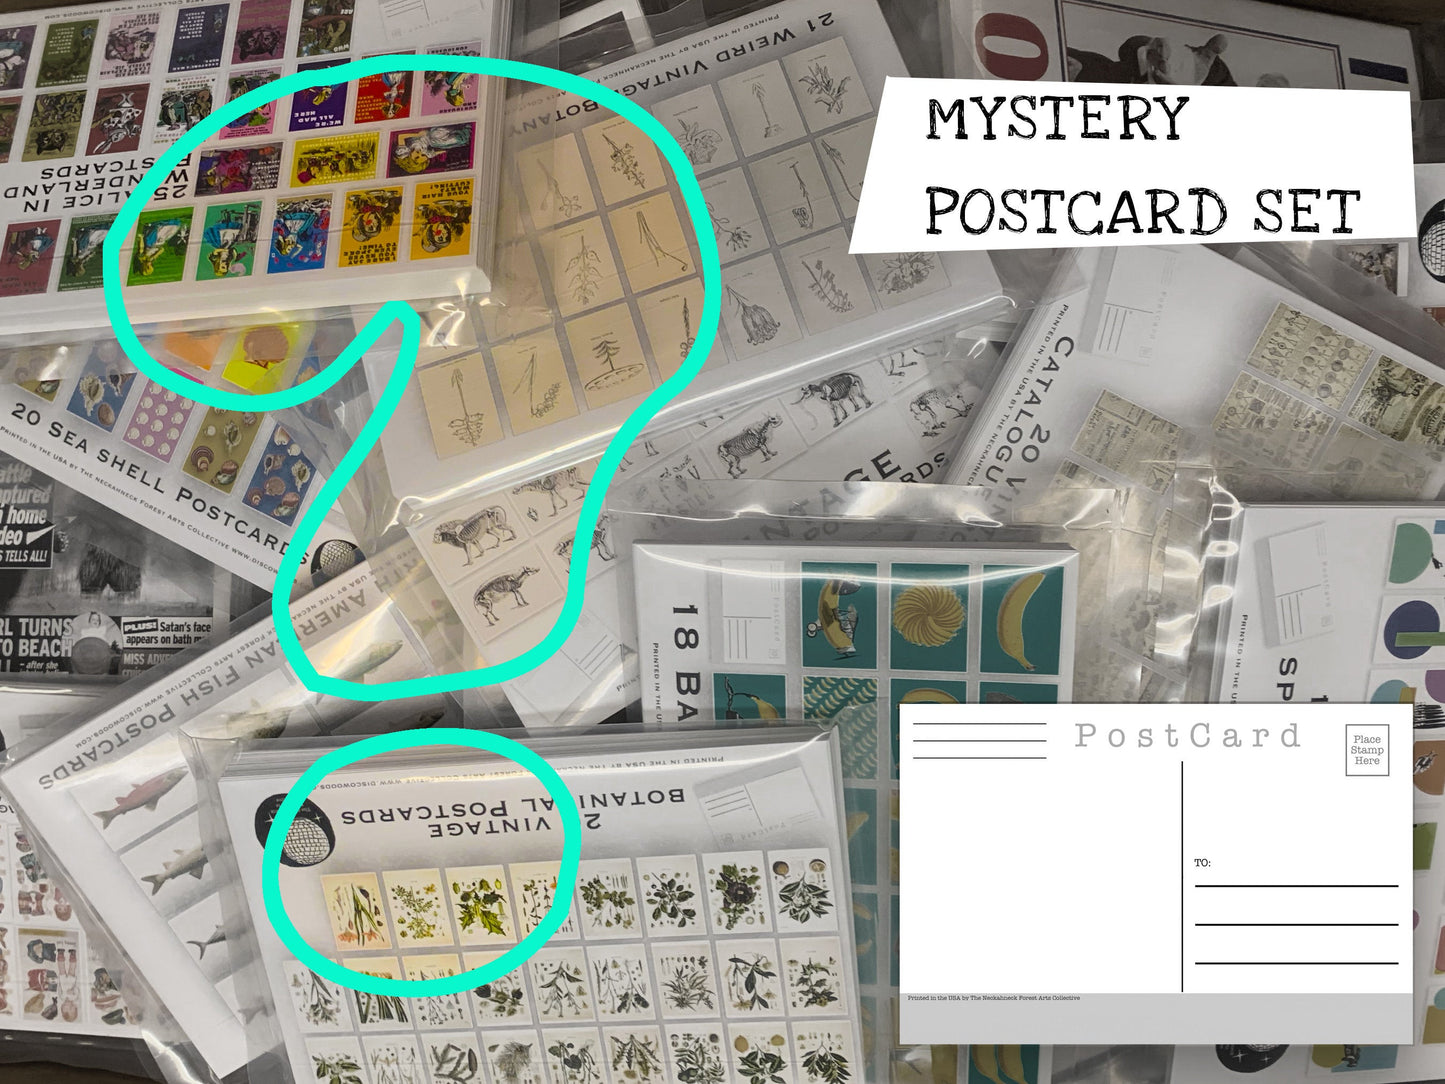 MYSTERY Postcard Set - A mystery pack of postcards from our shop - even we won't know what you get! free domestic shipping